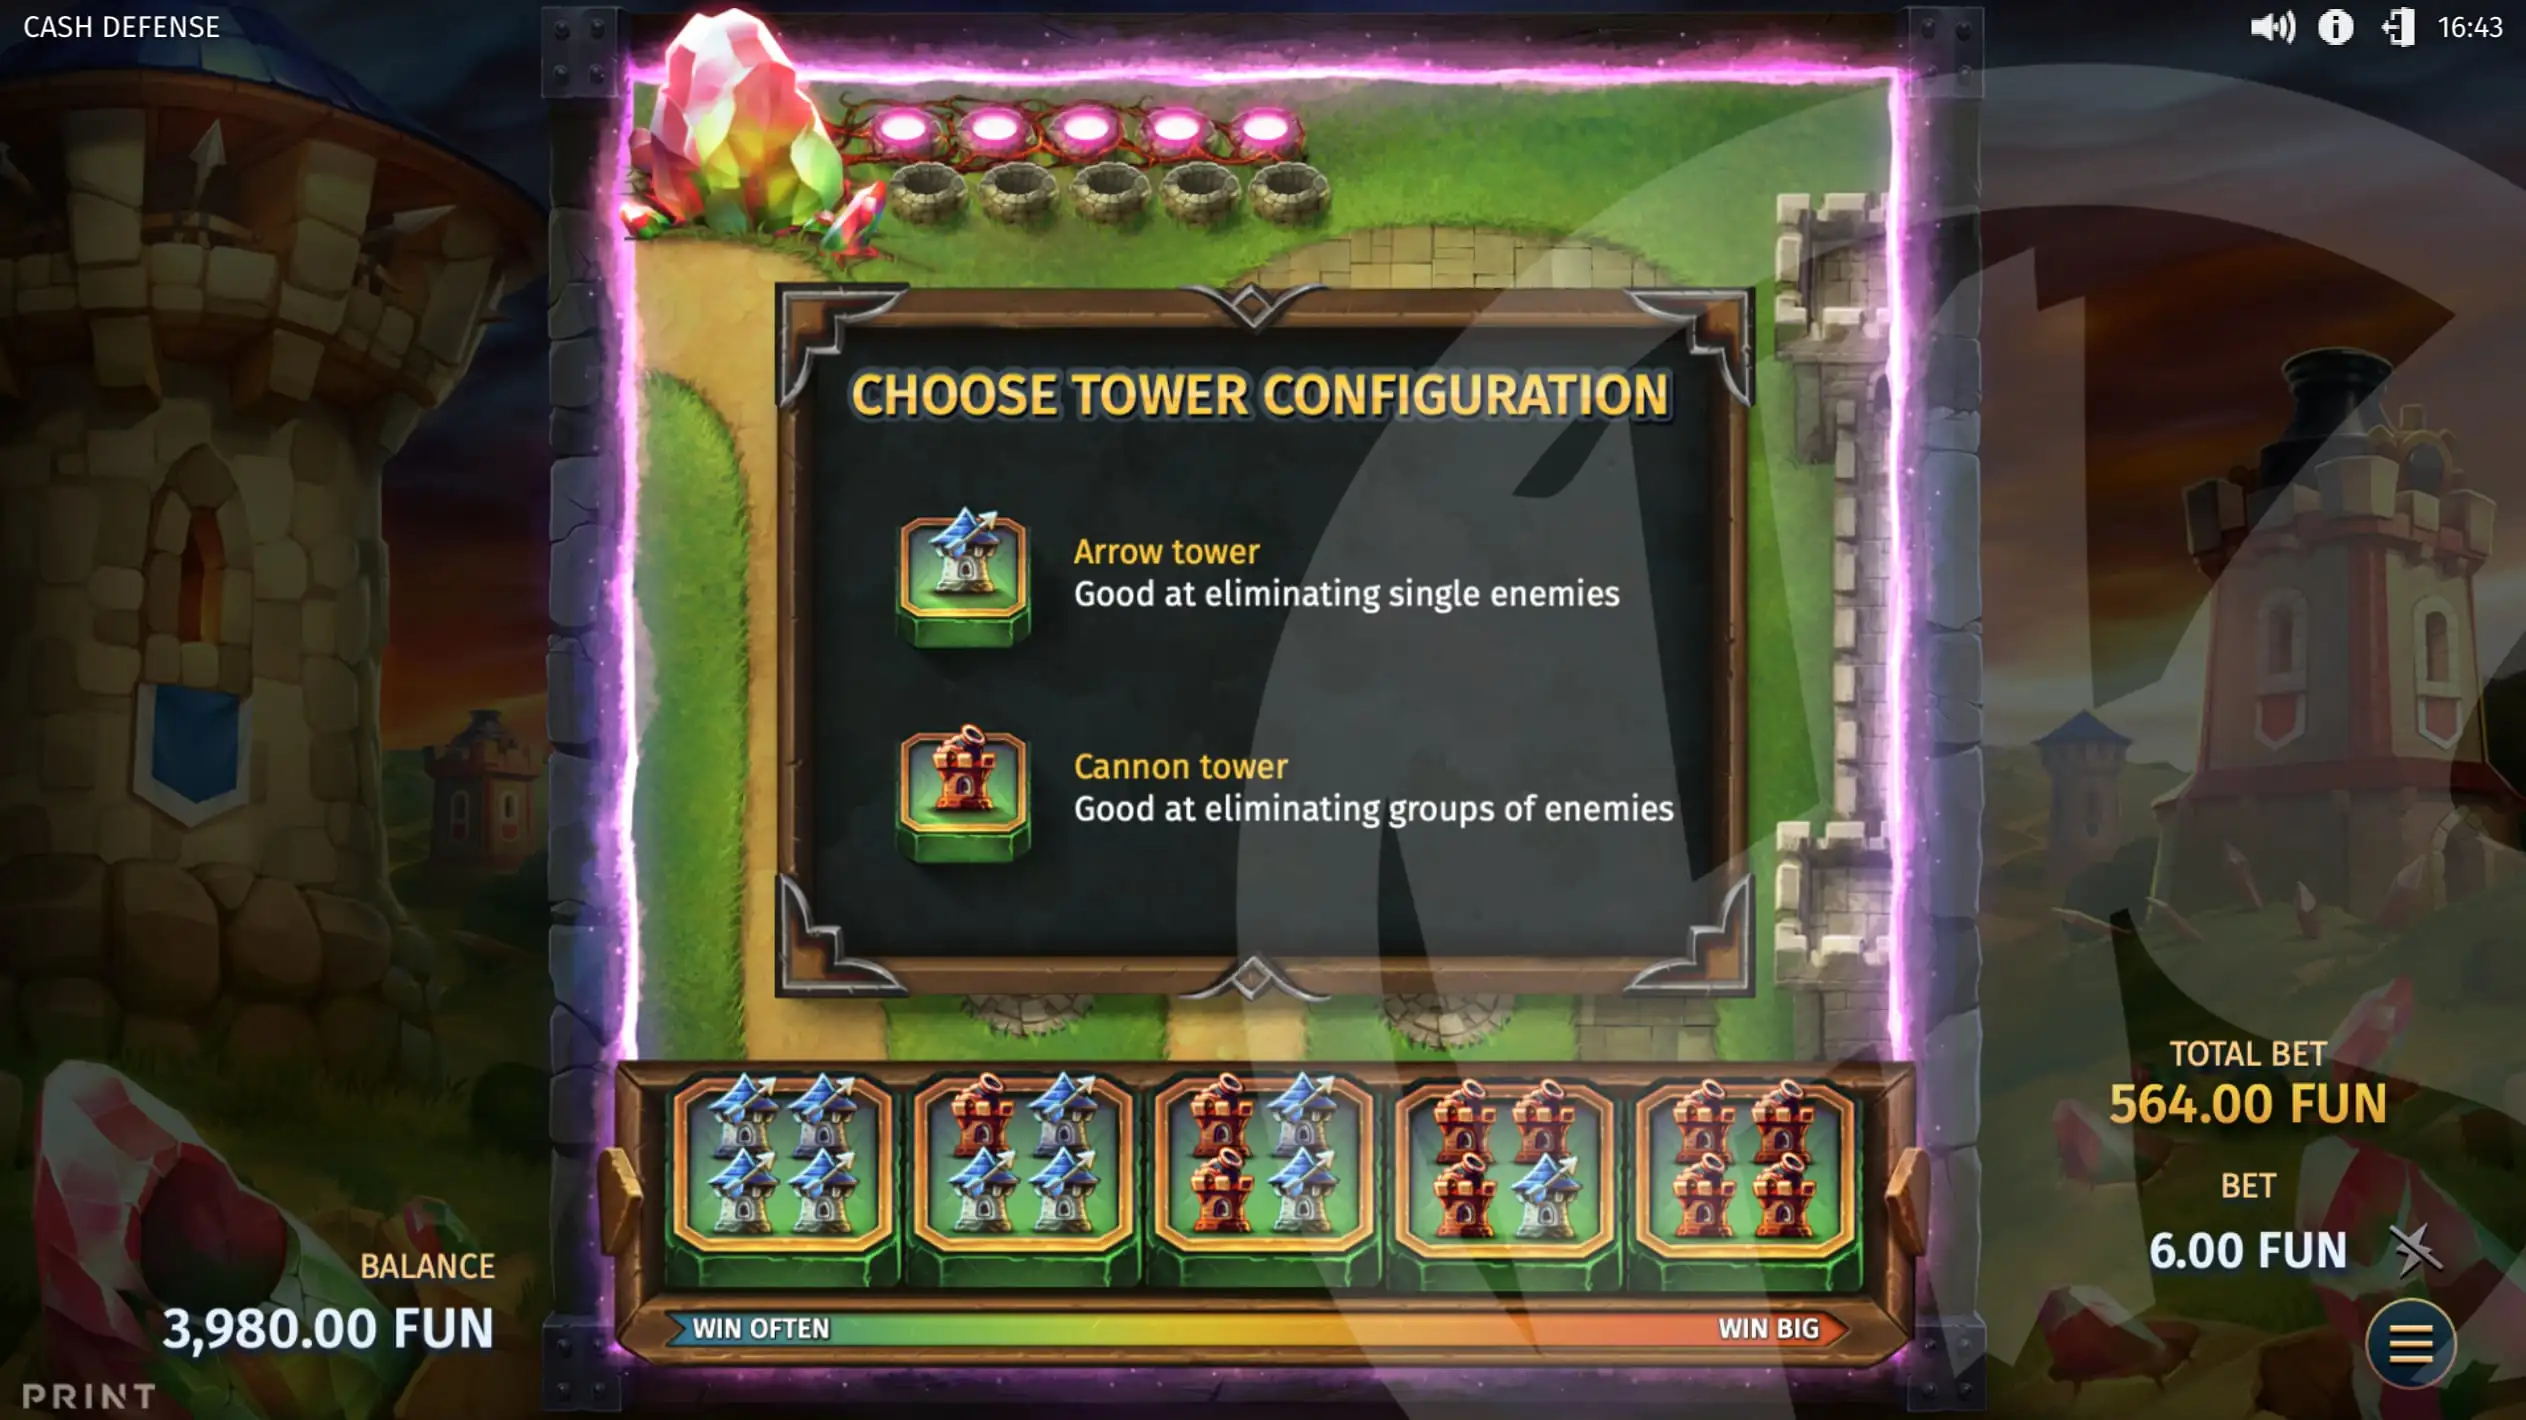 Choose Your Tower Configuration Before Starting the Grand TD Bonus